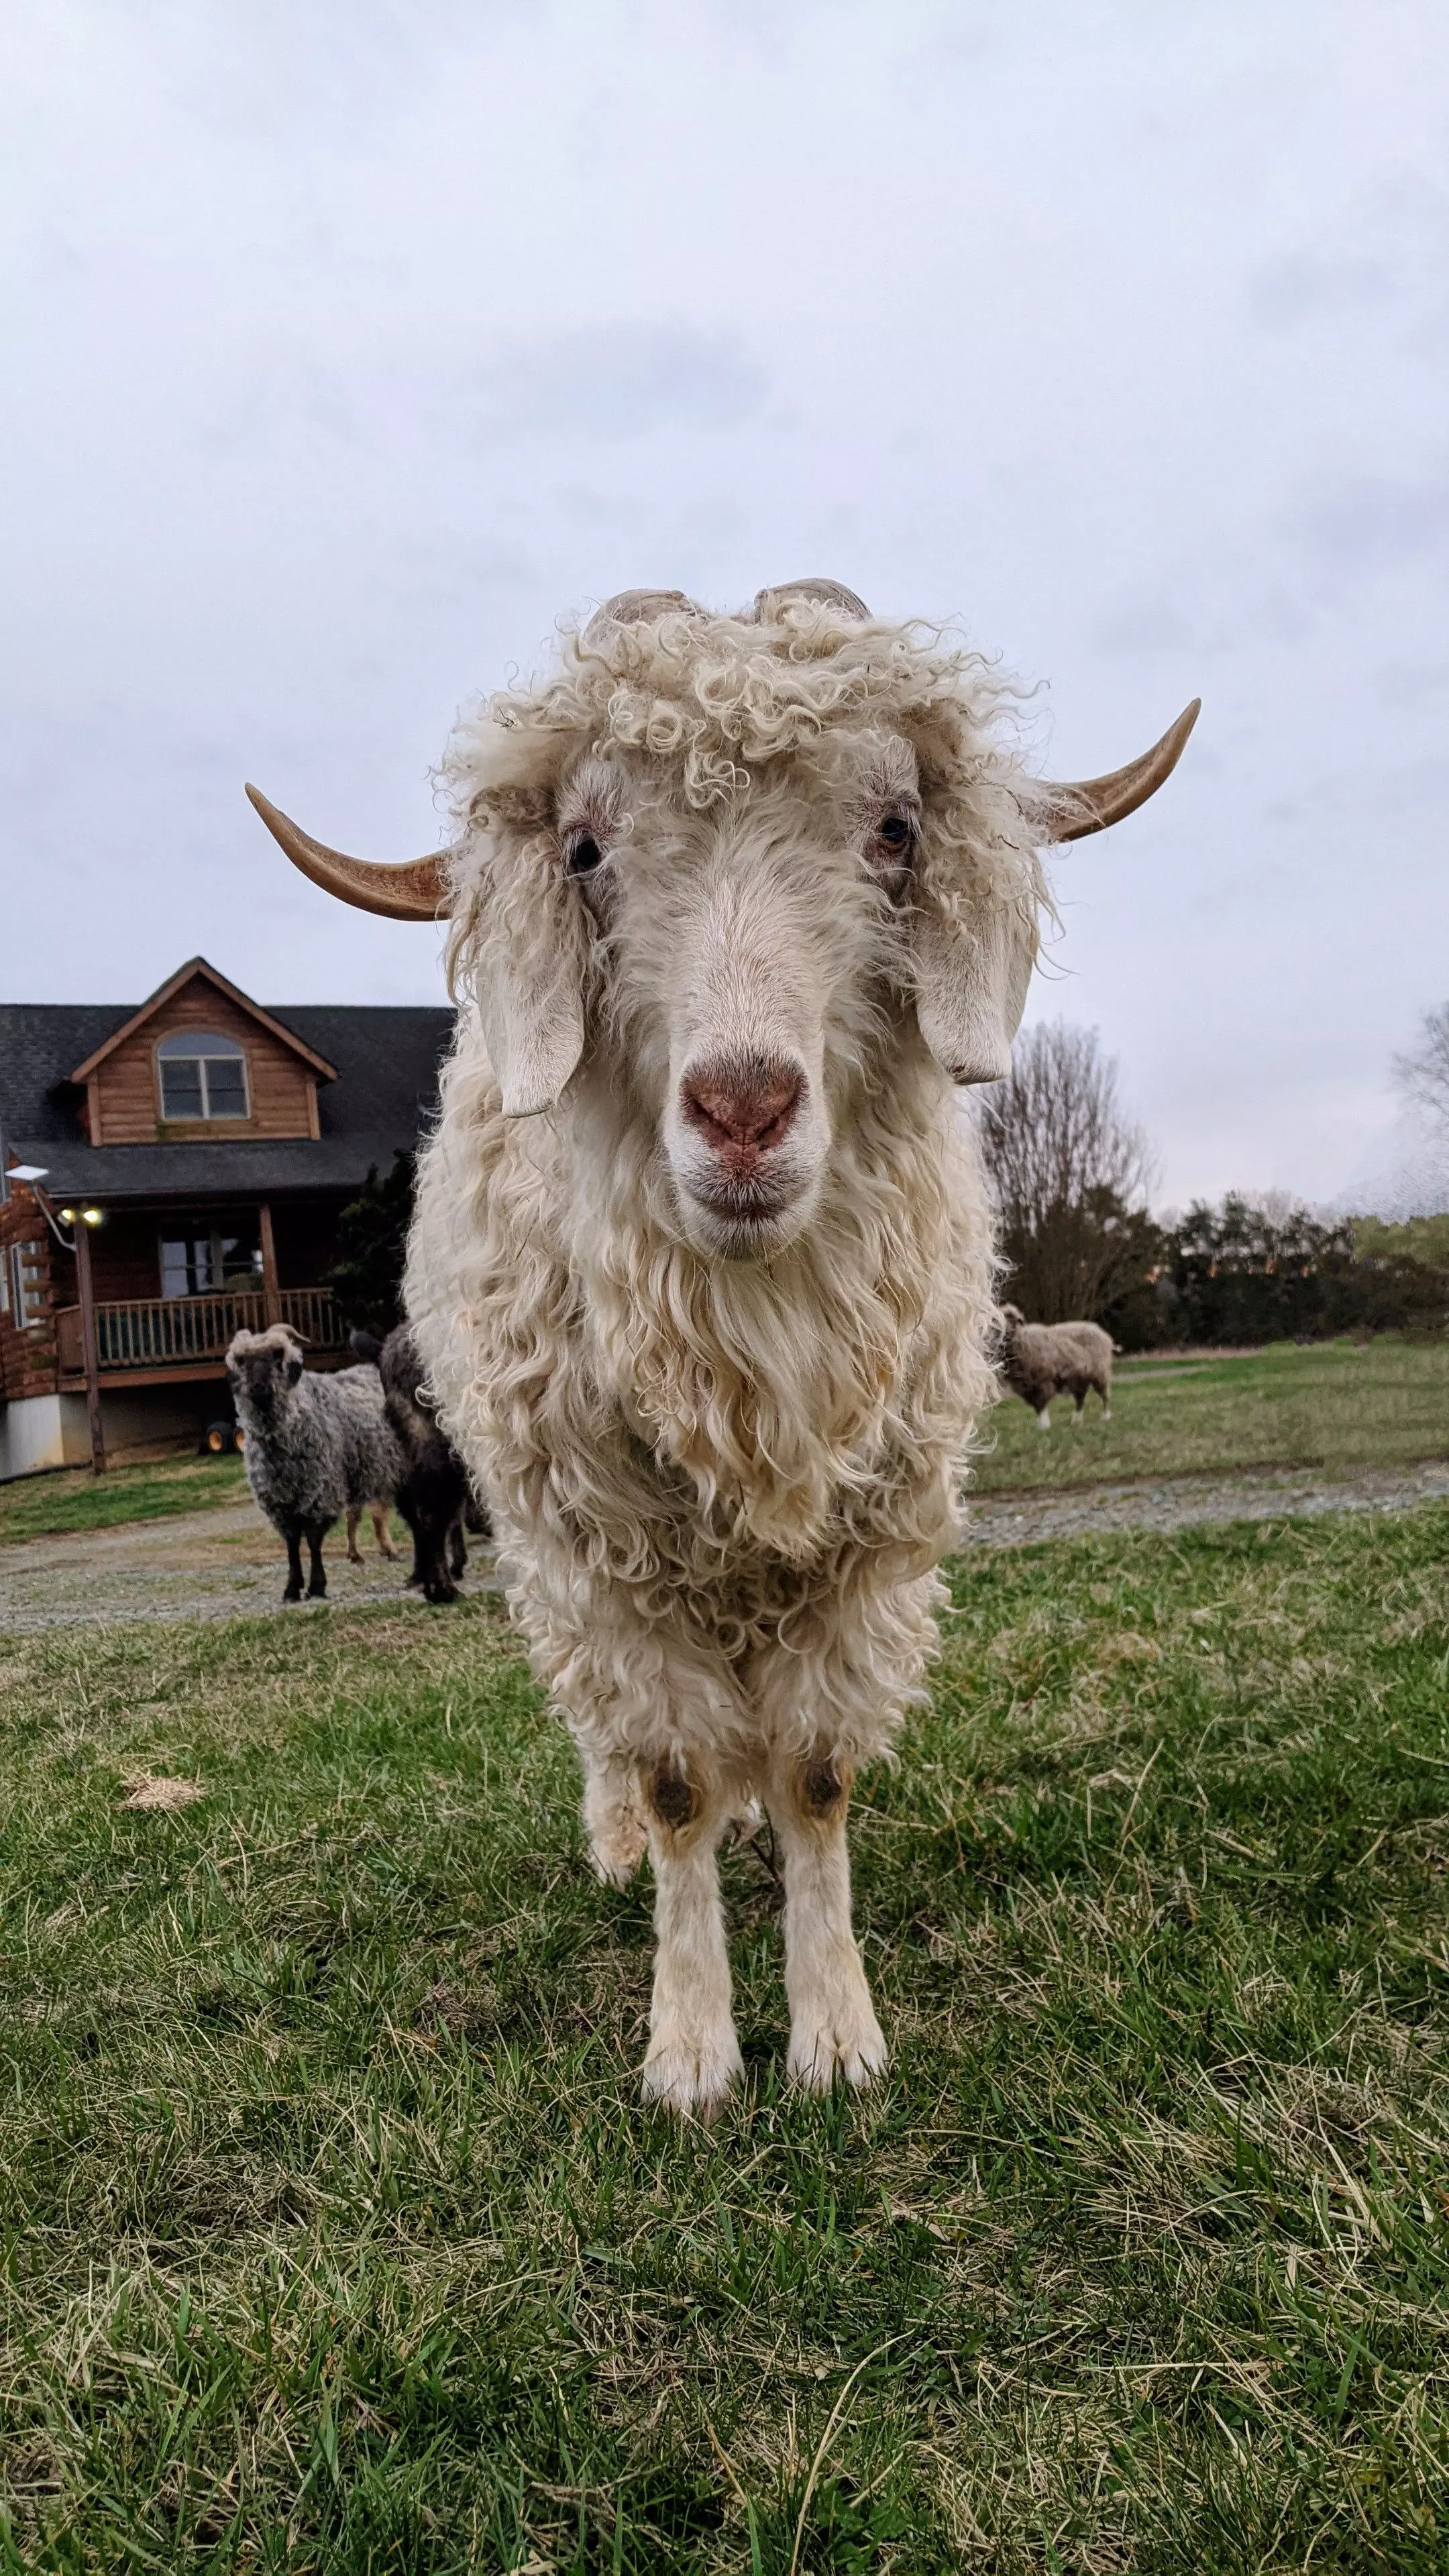 An image of a goat named Mercury.